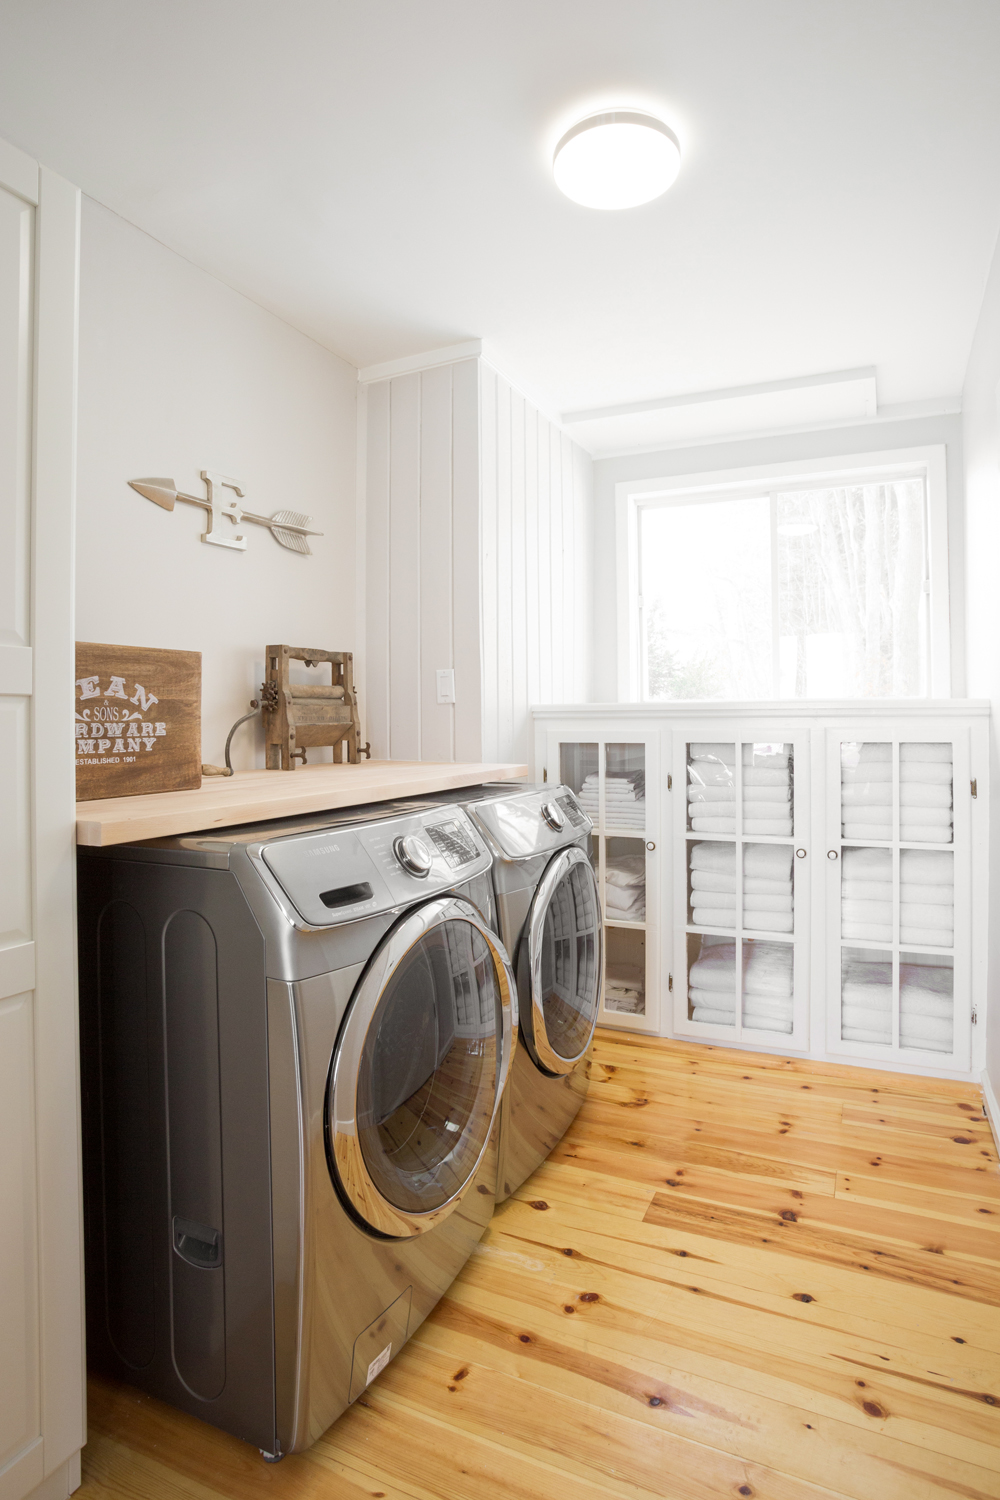 light-filled laundry room with warm wood floors and storage.